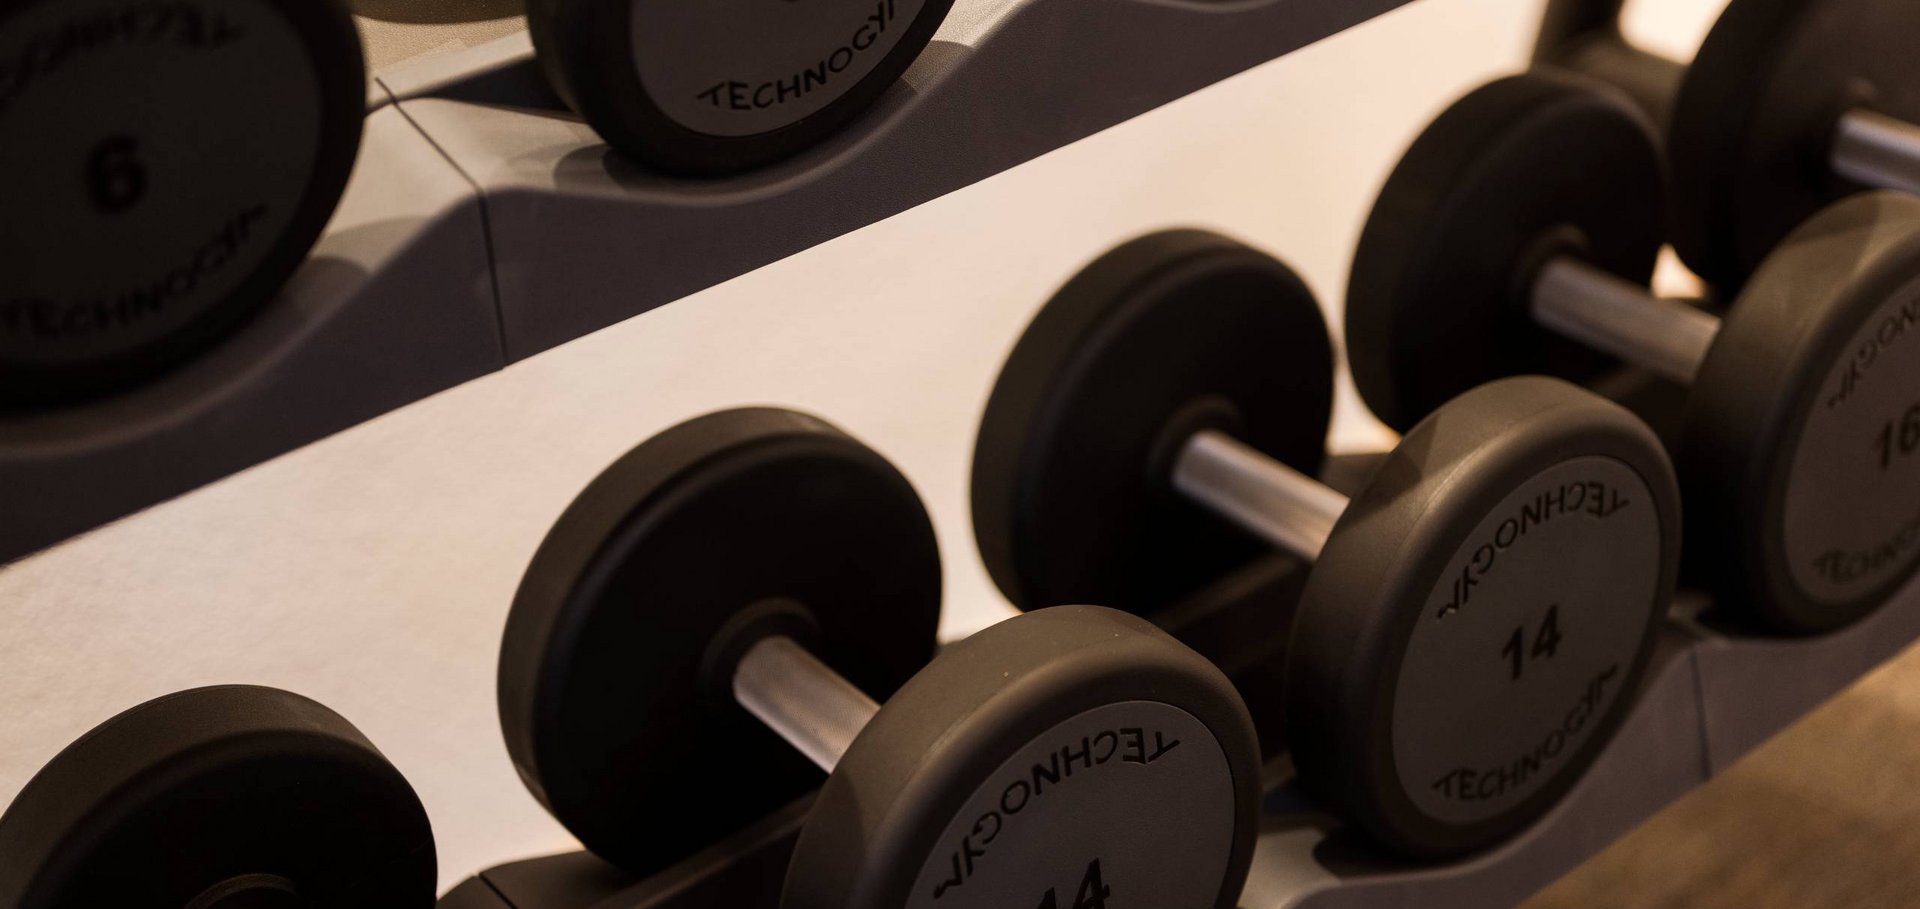 Get active at your hotel with gym in Ischgl